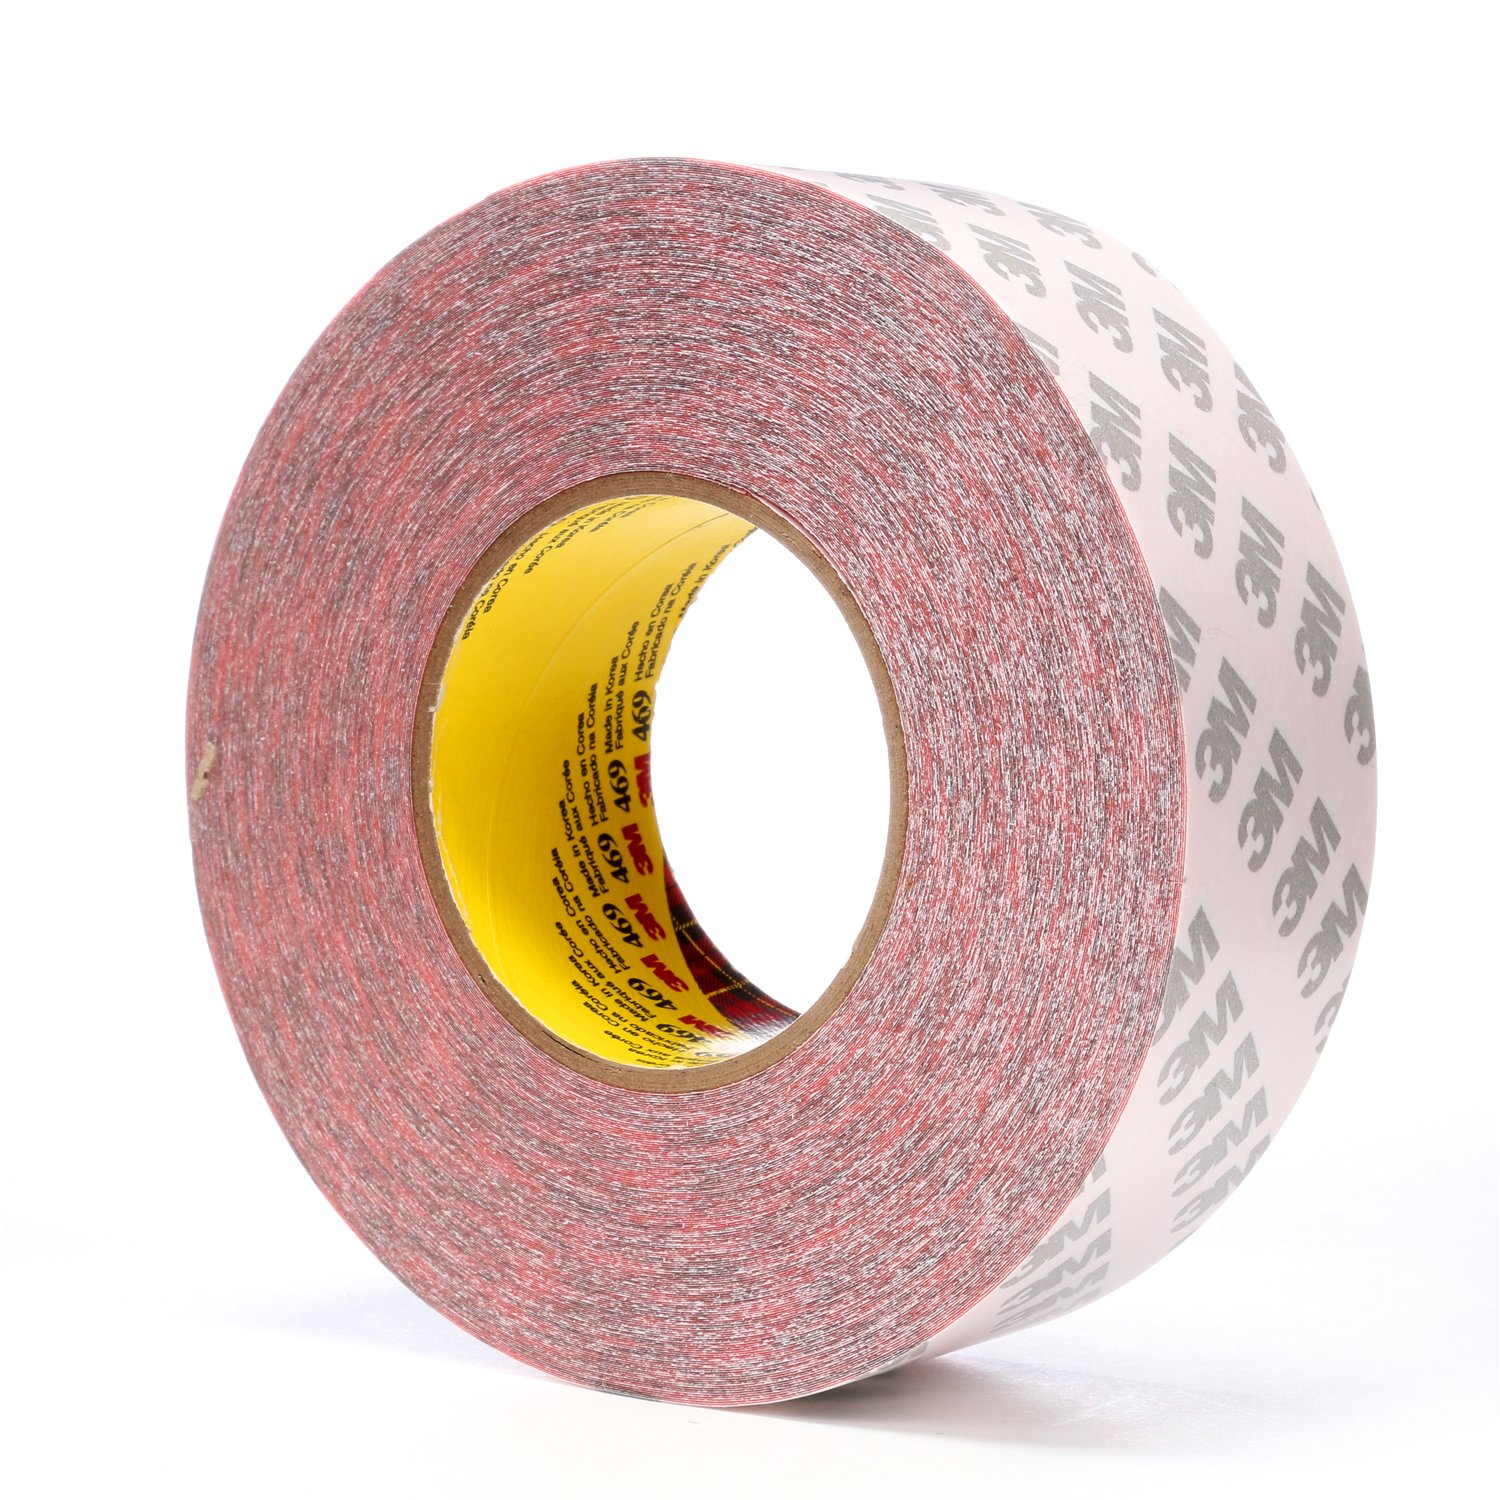 7000037751 - 3M Double Coated Tape 469, Red, 2 in x 60 yd, 16 rolls per case